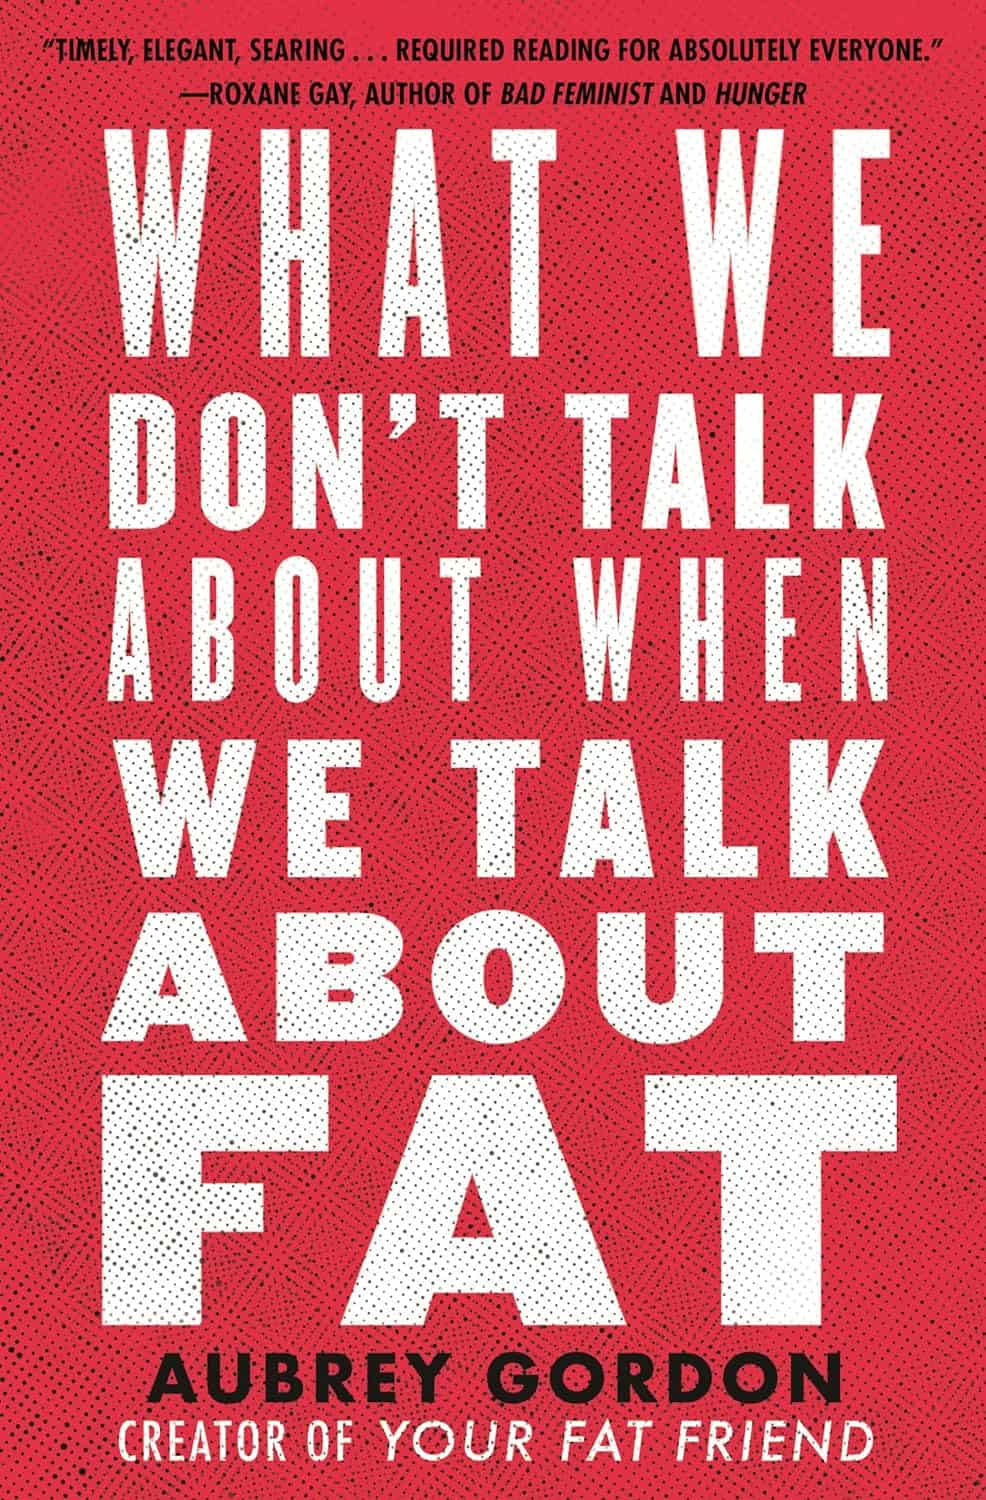 What is Often Overlooked in Discussions About Fat by Aubrey Gordon